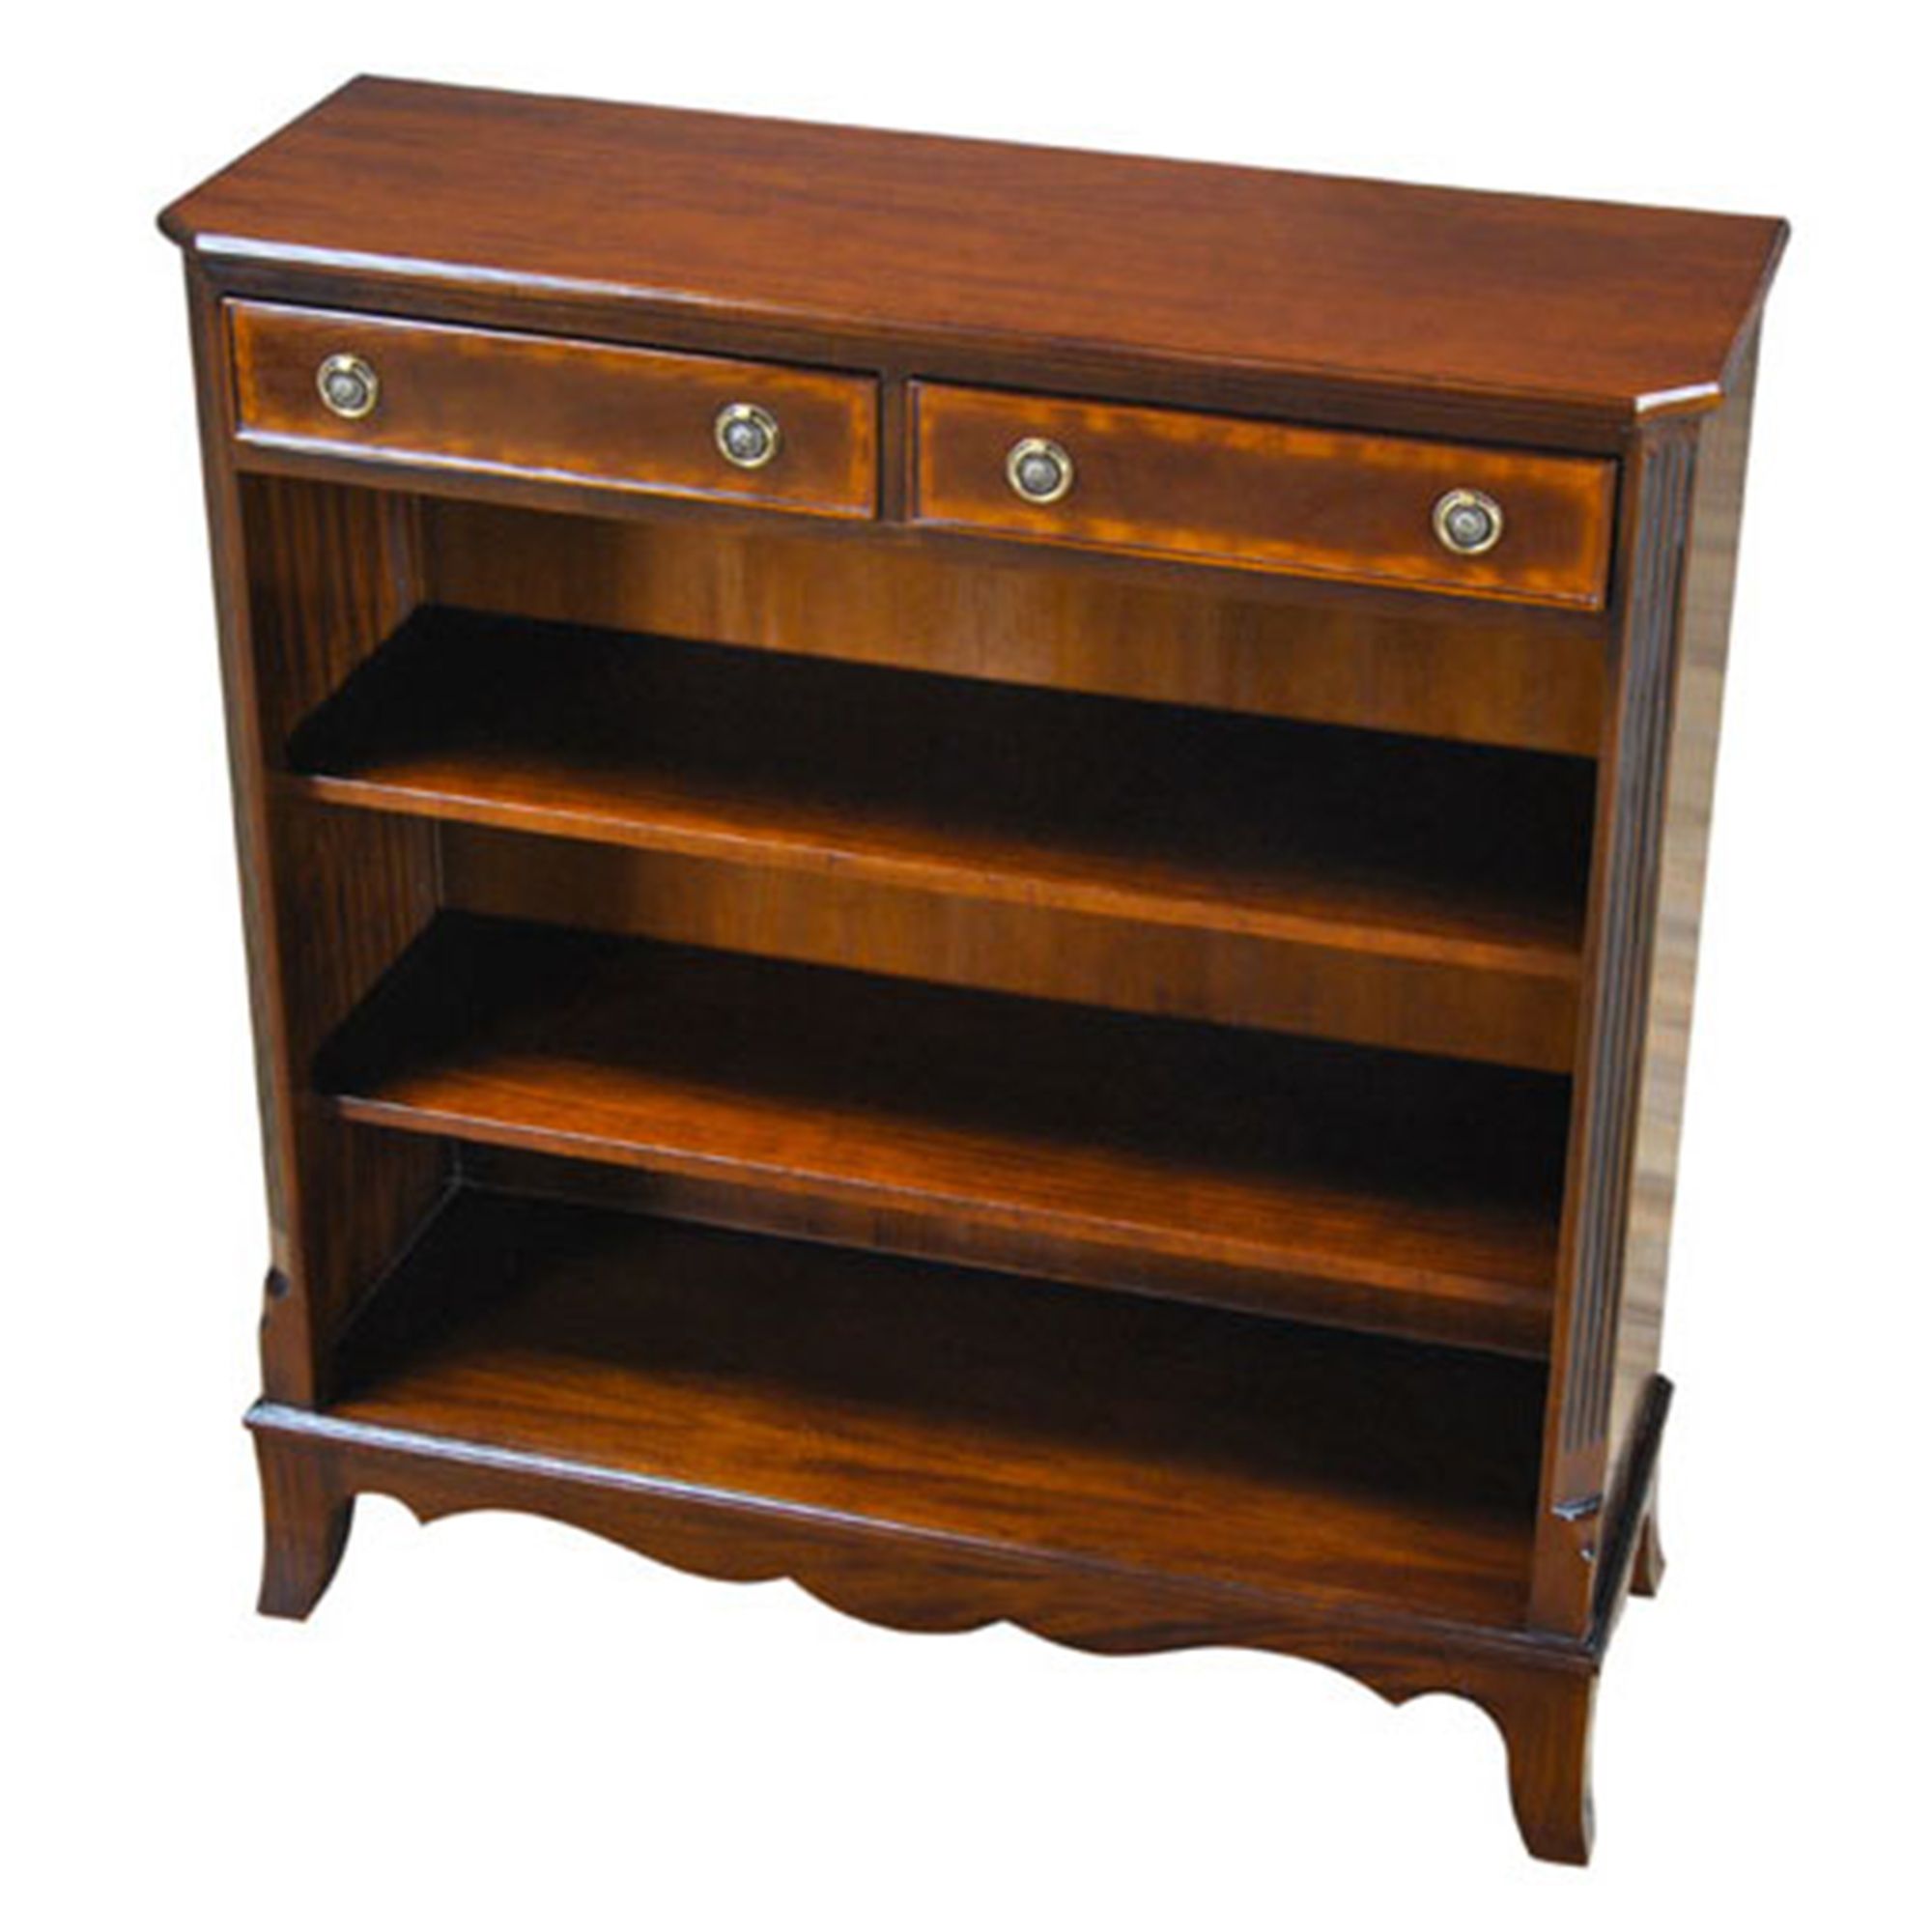 Two Drawer Bookcase, Banded Mahogany Bookcase, Niagara Furniture Pertaining To Two Drawer Bookcases (View 8 of 15)